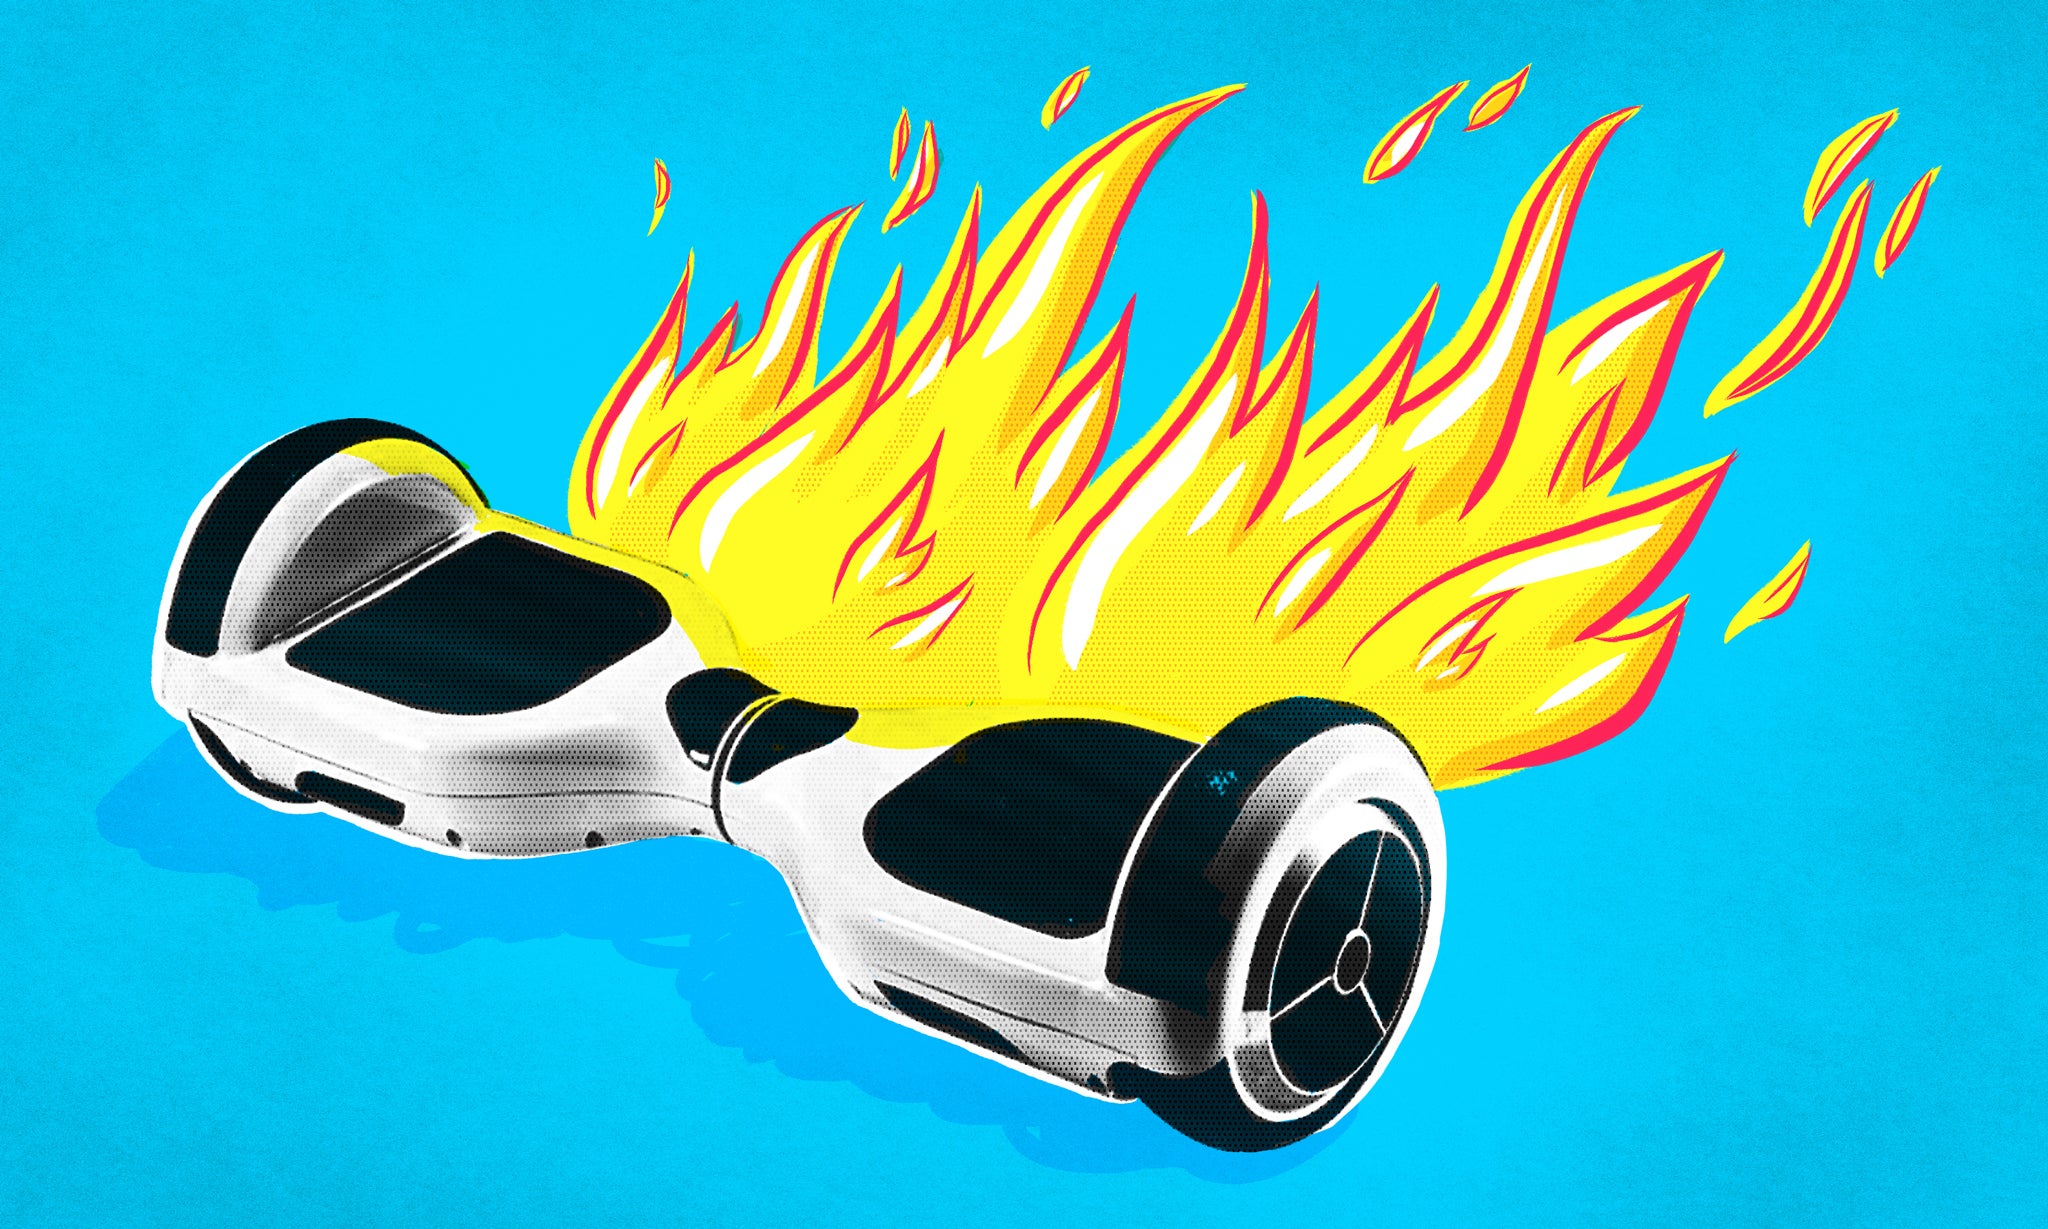 Australian Government To Investigate Hoverboards, More May Be Recalled